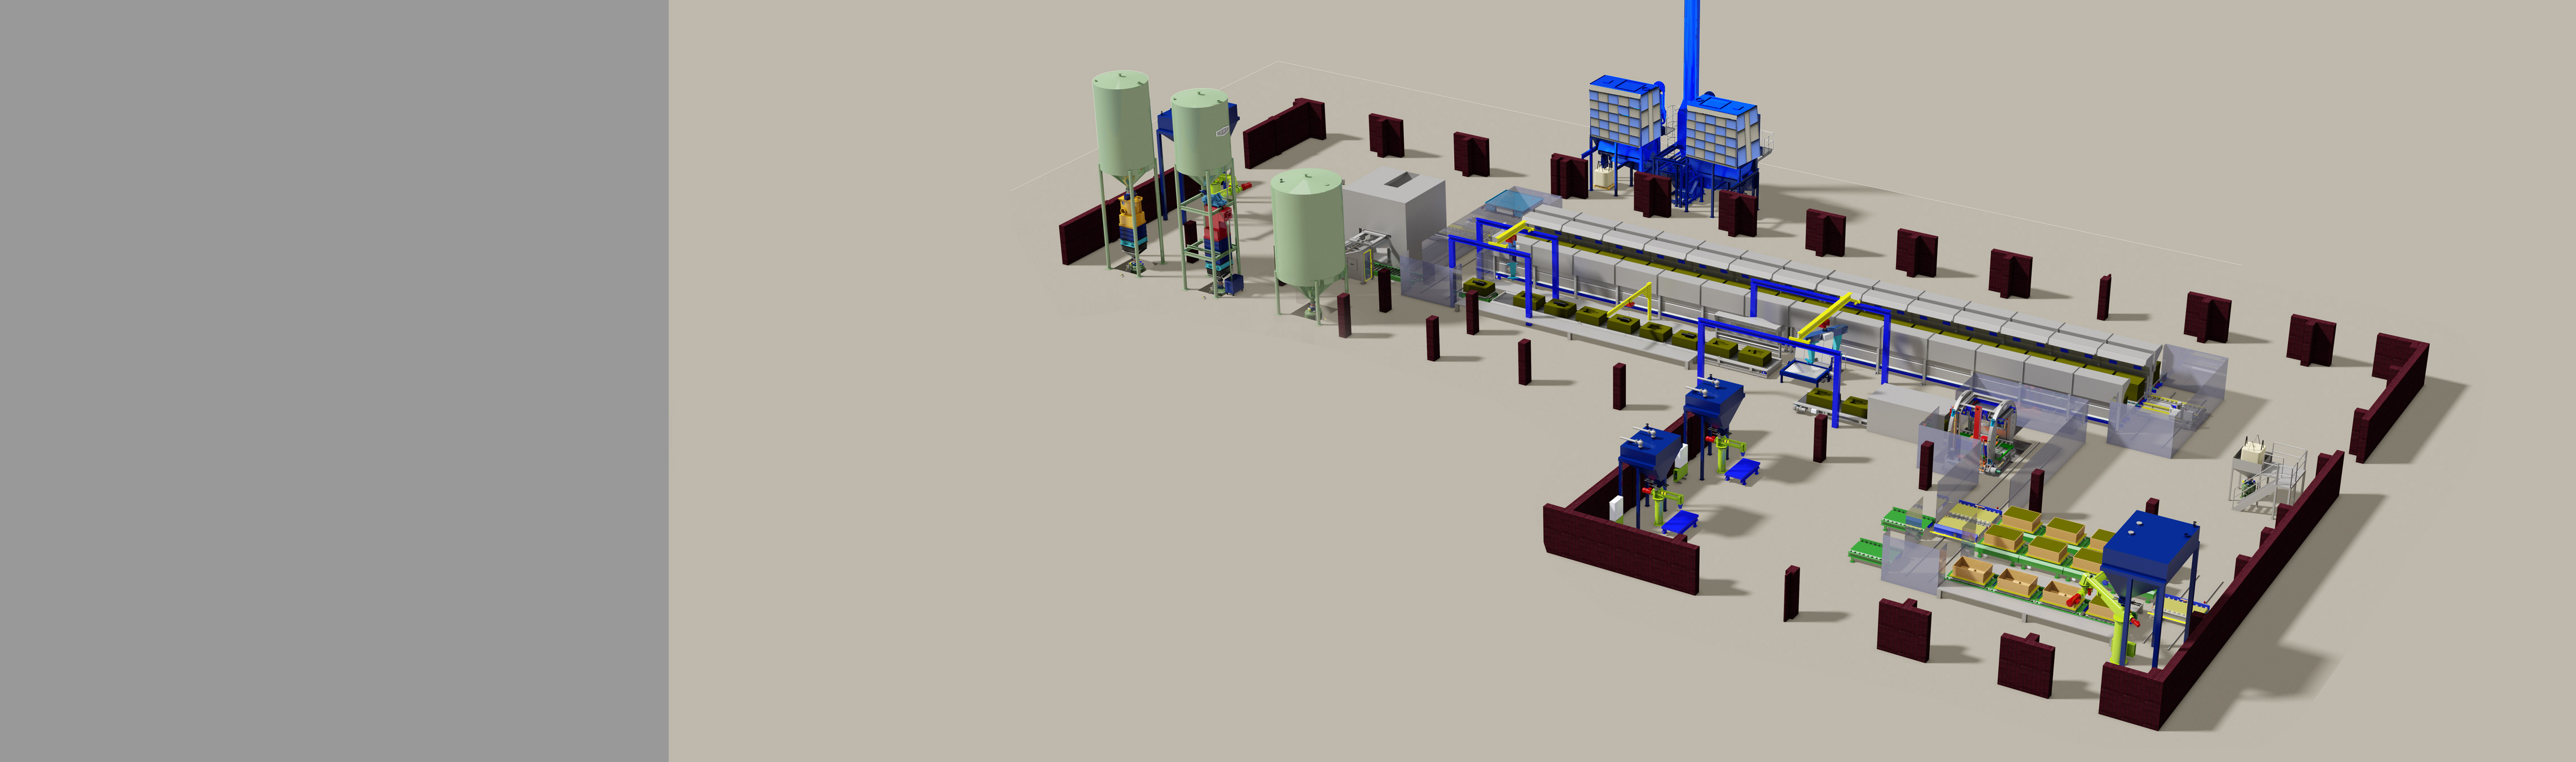 DUST COLLECTOR FOUNDRY APPLICATION